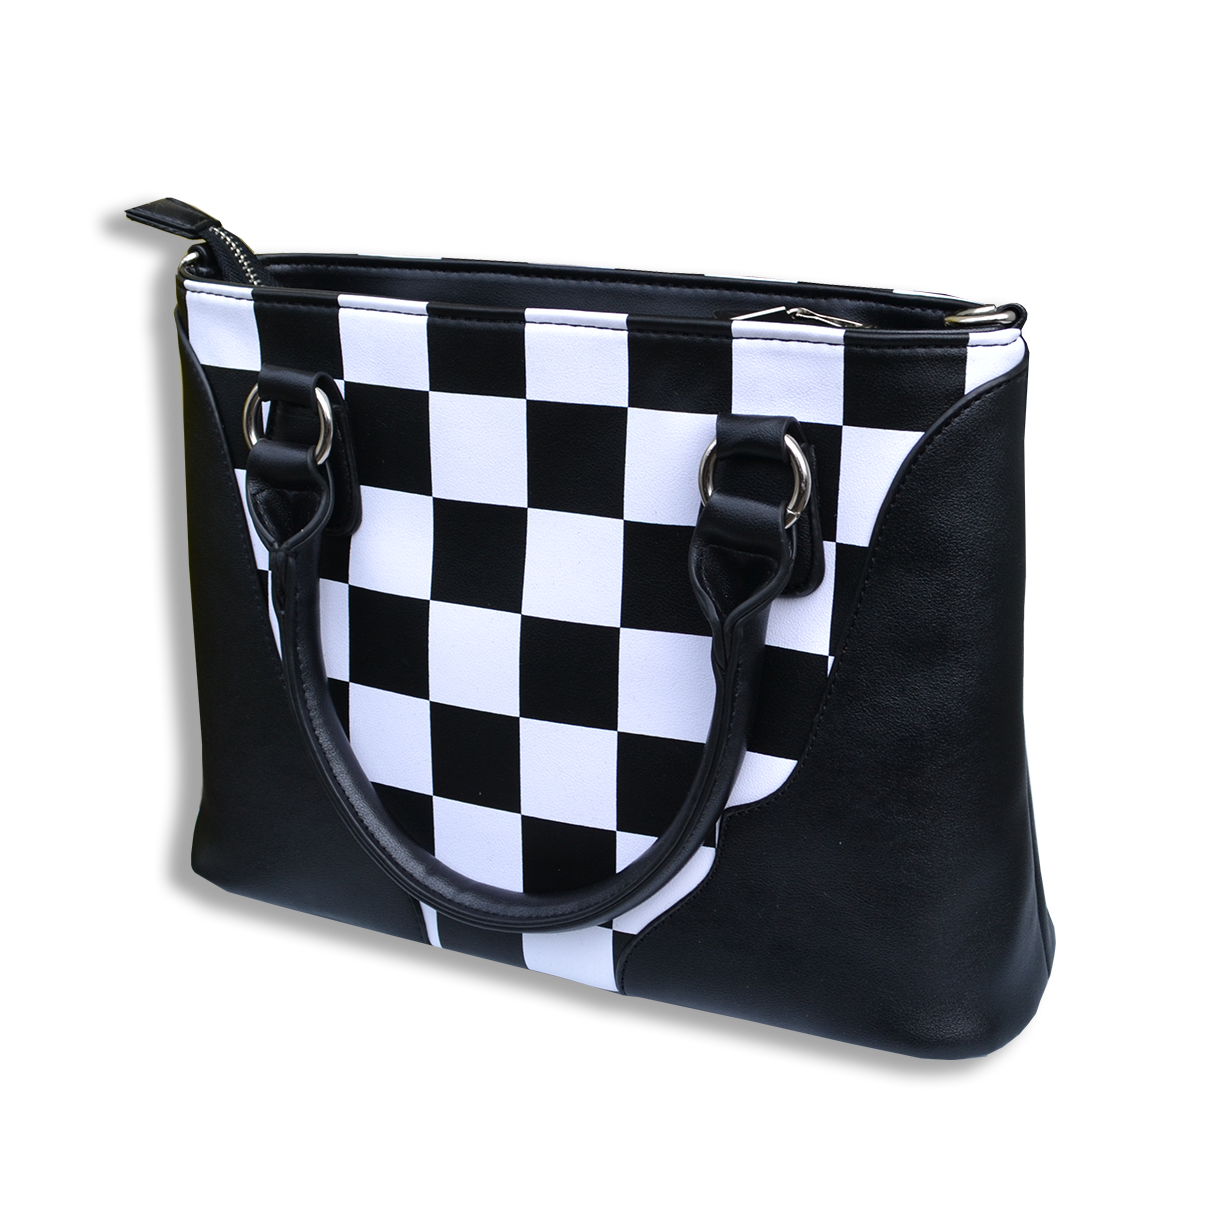 RICHPORTS Checkered Women PU Leather Tote Bag Tassels Leather Shoulder  Handbags Fashion Ladies Purses Satchel Messenger Bags 